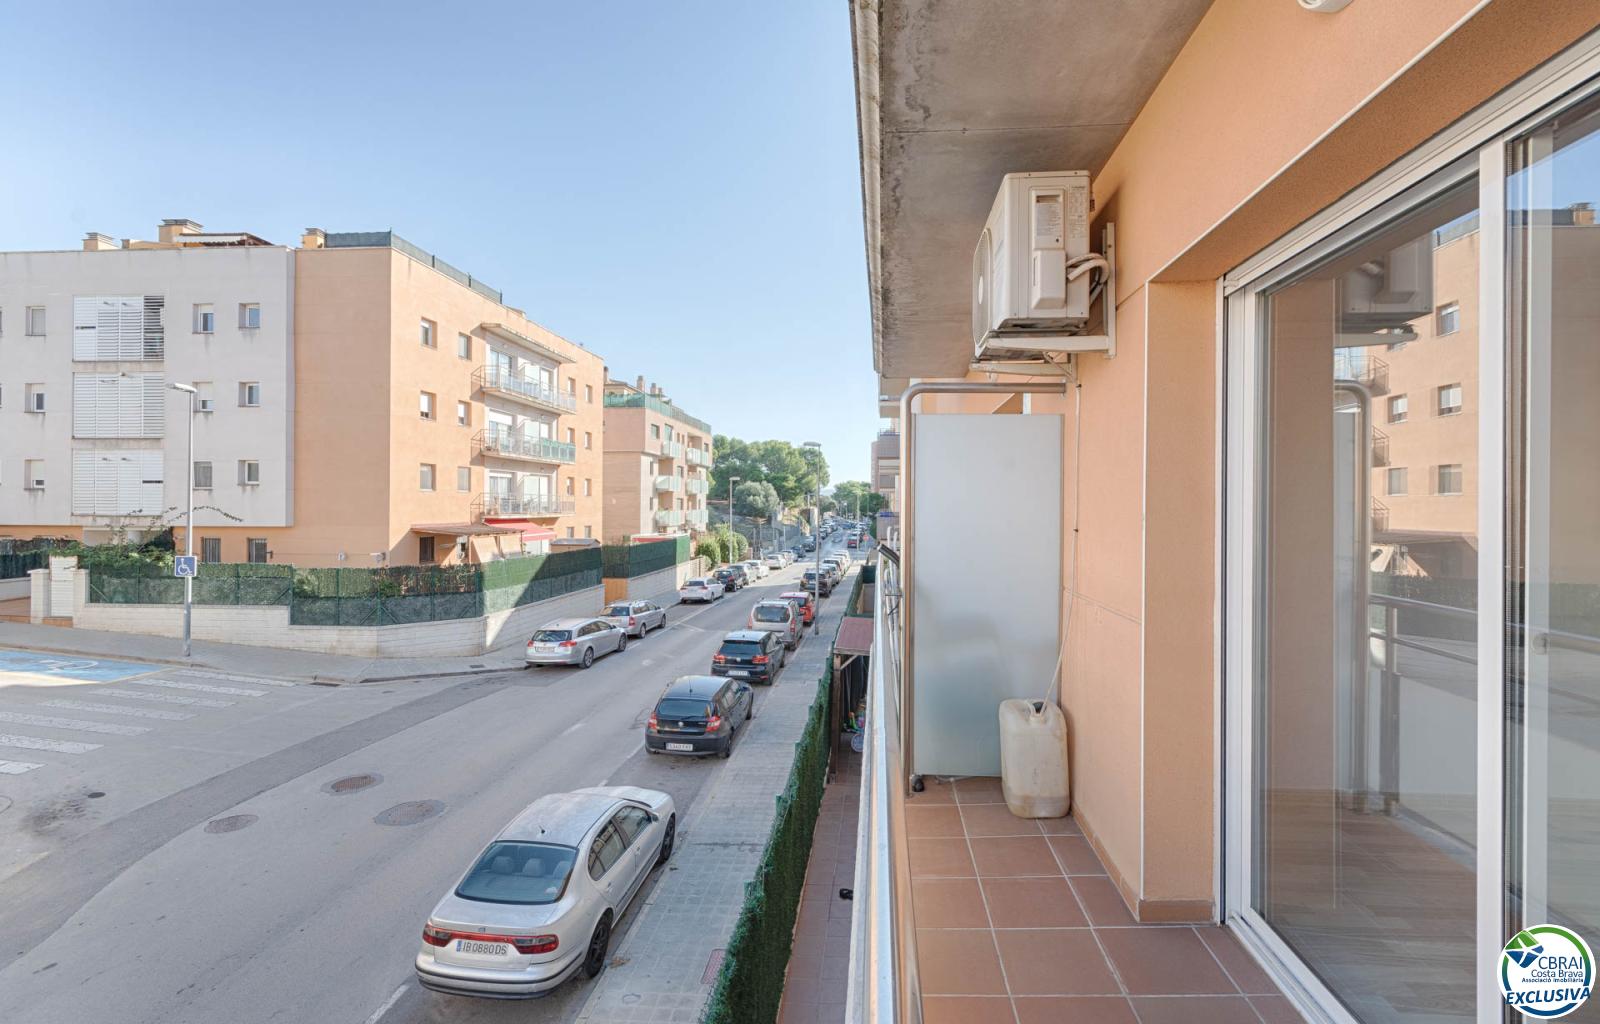 🏡 Your Home in Figueres awaits you! 🌟